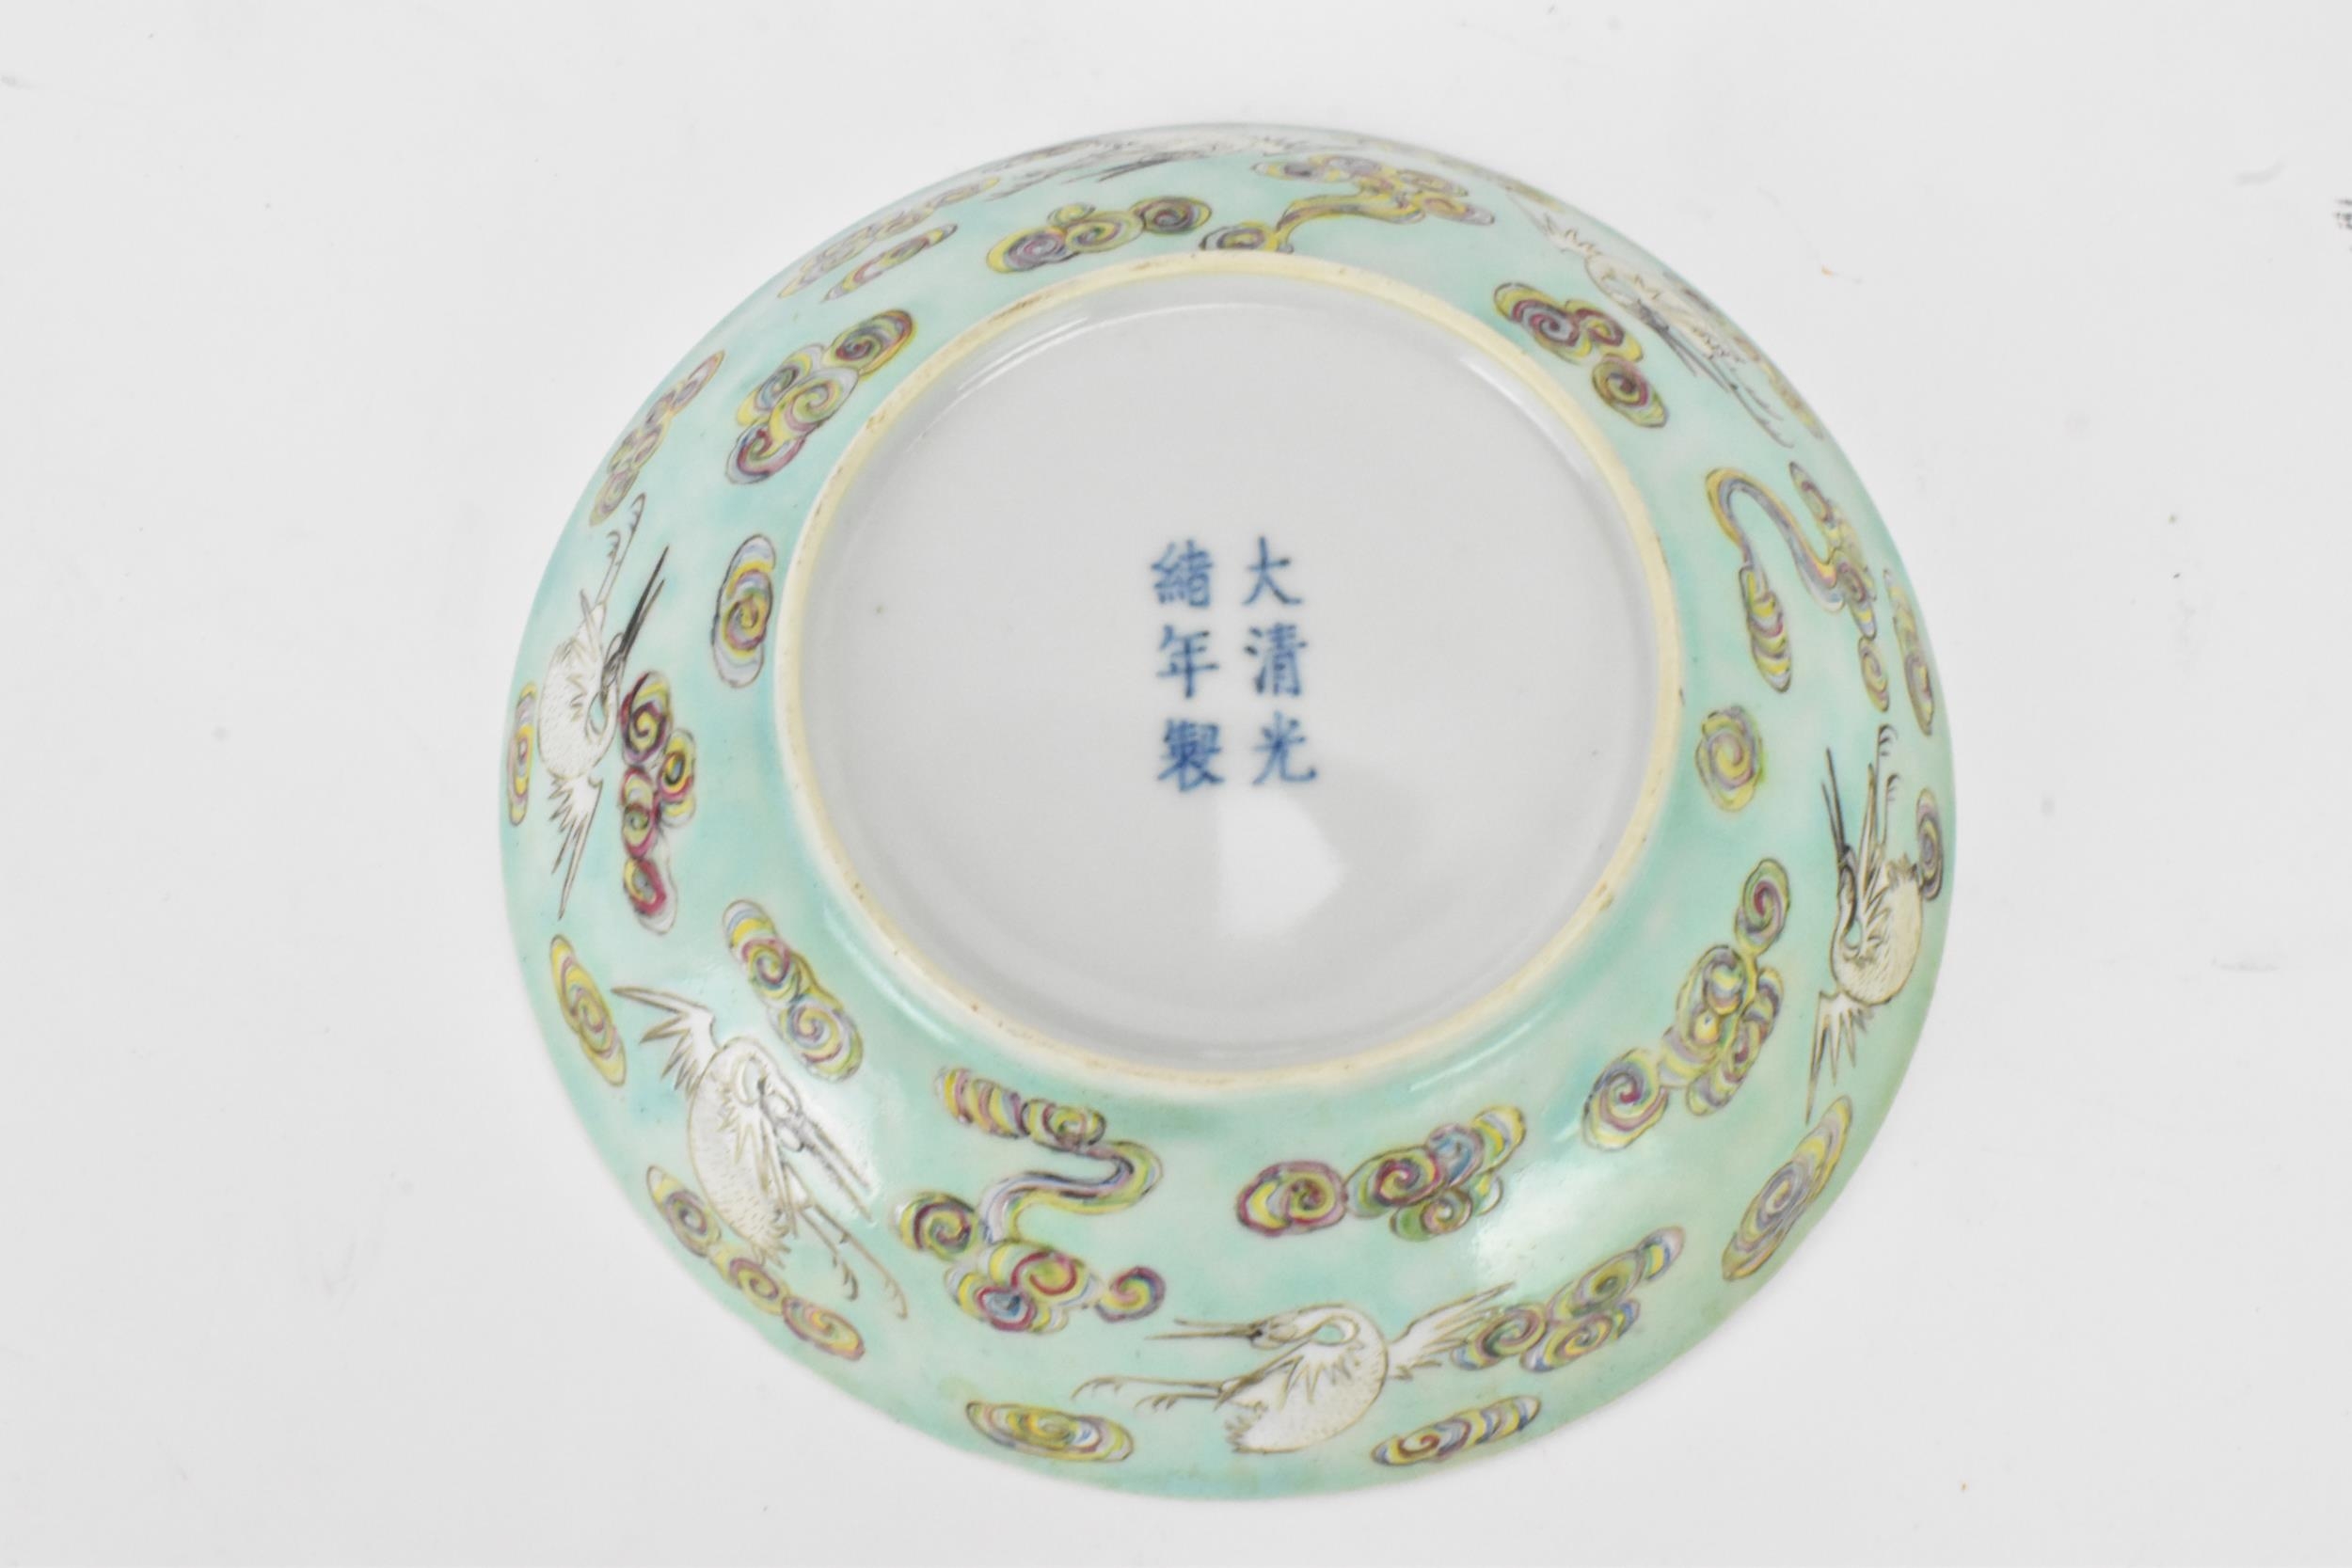 A set of three Chinese Qing dynasty, Guangxu period, famille rose bowls, decorated in polychrome - Image 7 of 7